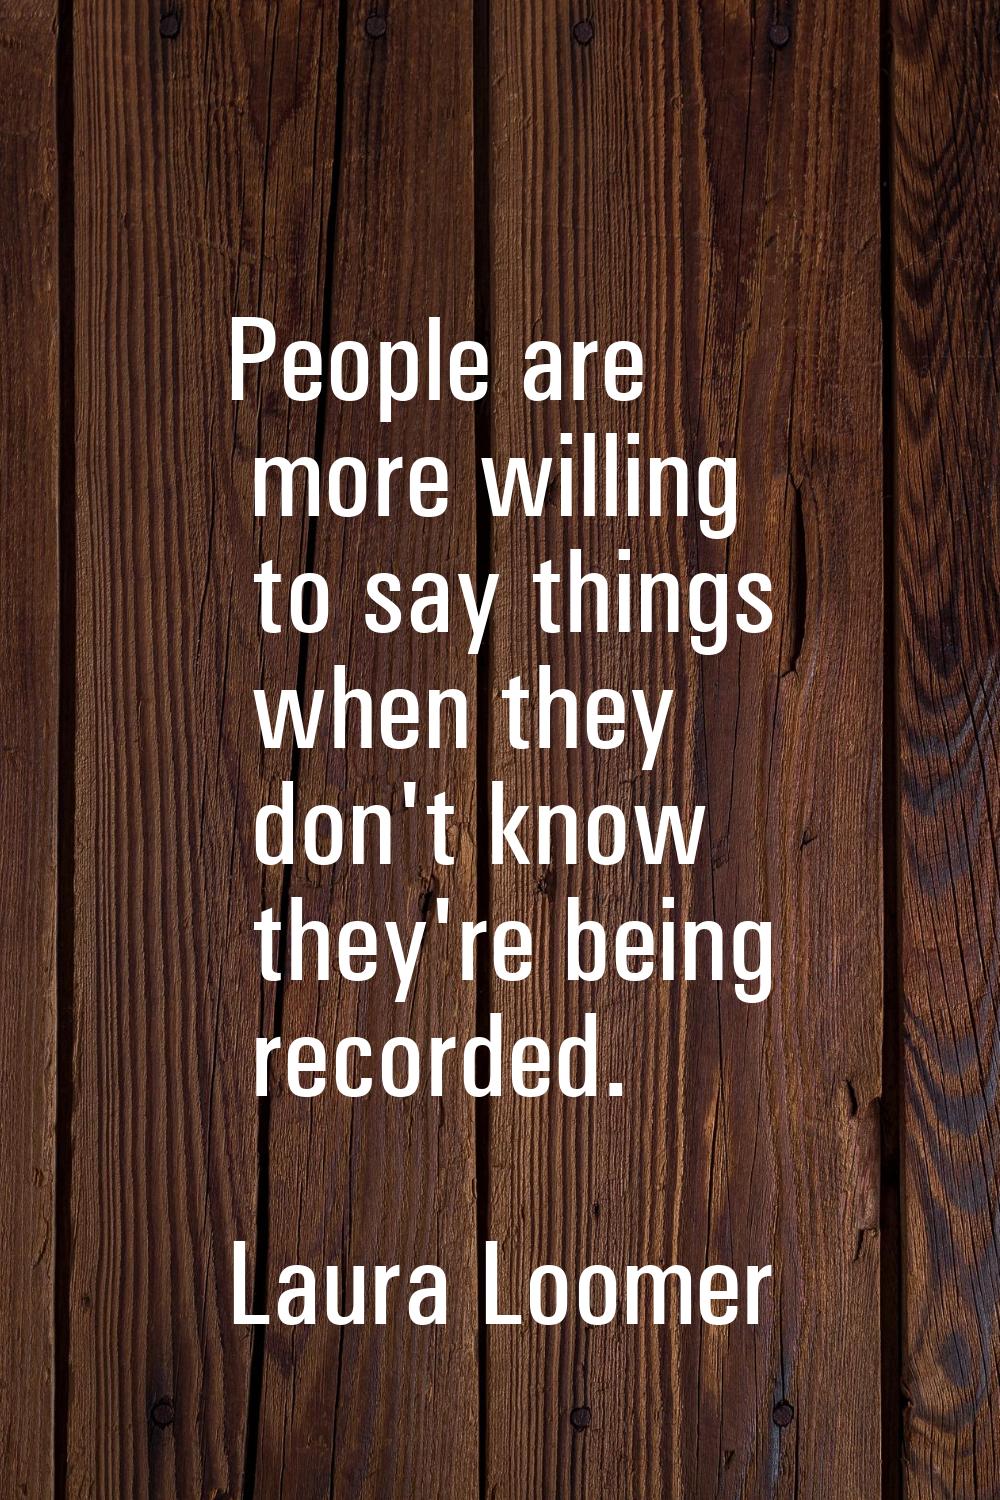 People are more willing to say things when they don't know they're being recorded.